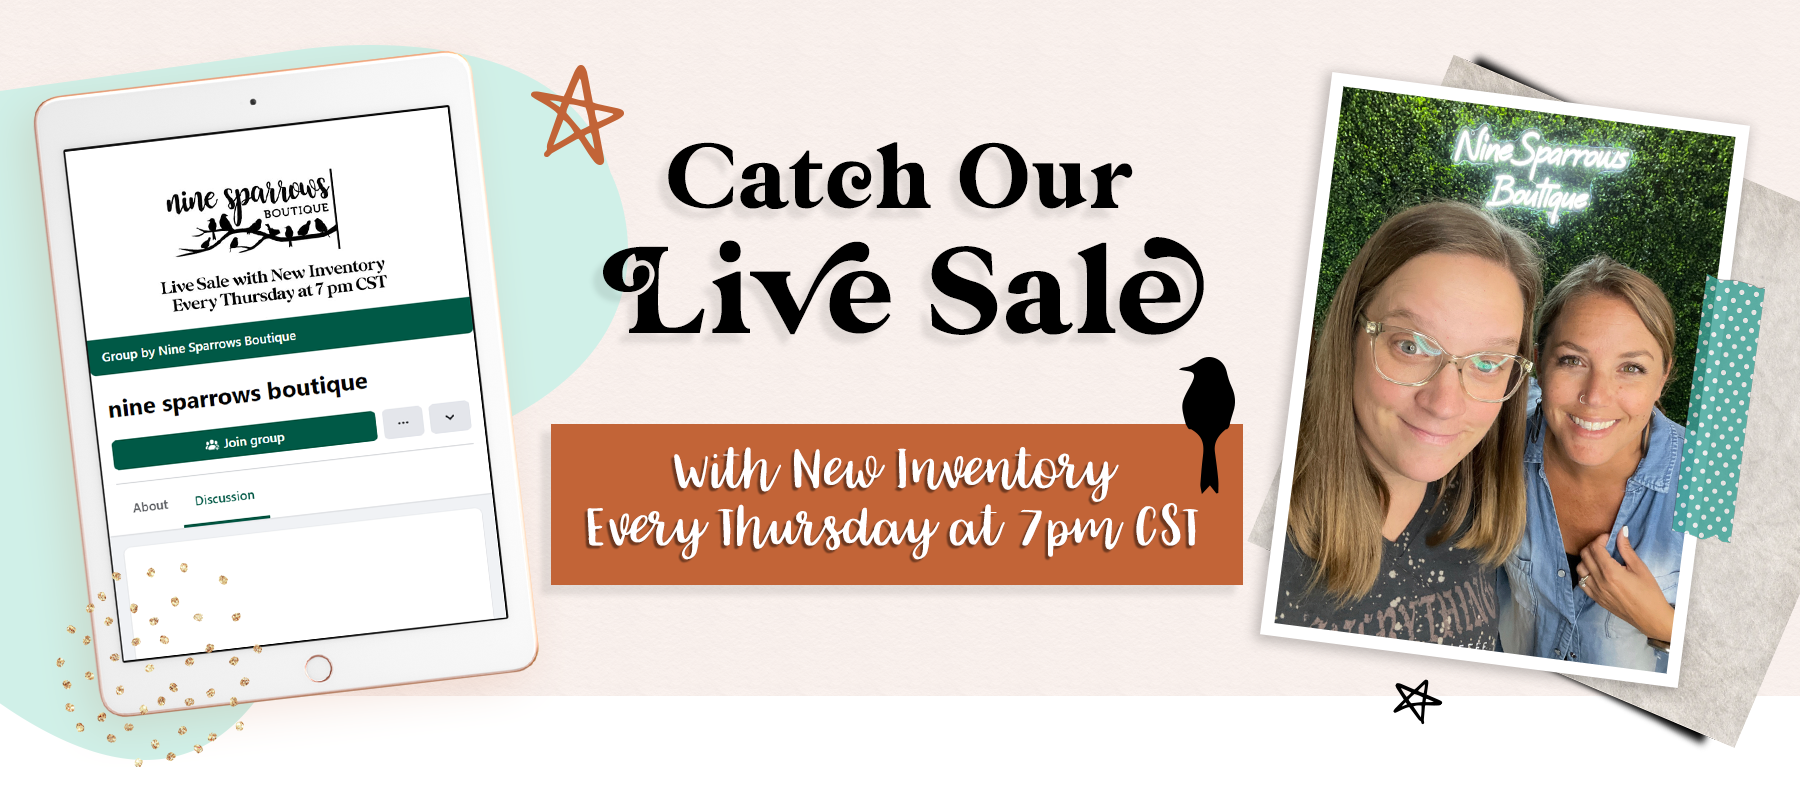 Catch our Lunchtime Live Sale with new inventory every Thursday at 12pm CST